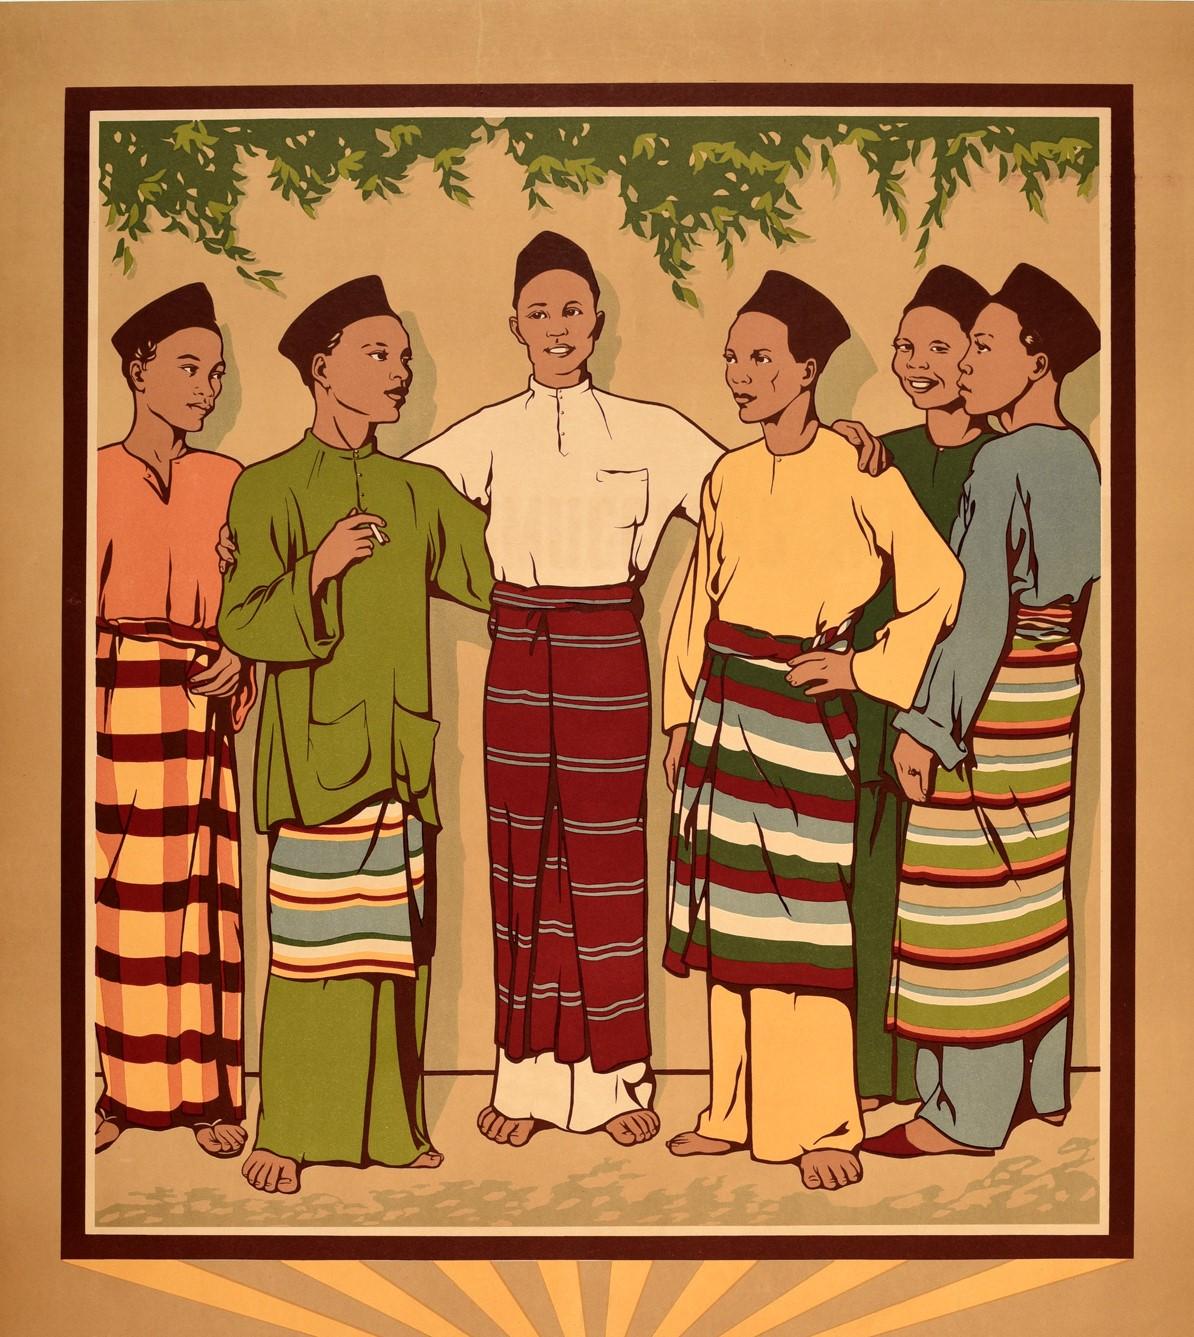 Original vintage travel poster entitled Malaya Land of Sunshine (now Peninsular Malaysia and Singapore) featuring a group of smiling men wearing colourful traditional clothing of a tunic top and trousers (baju melayu), a songkok cap and a sarong